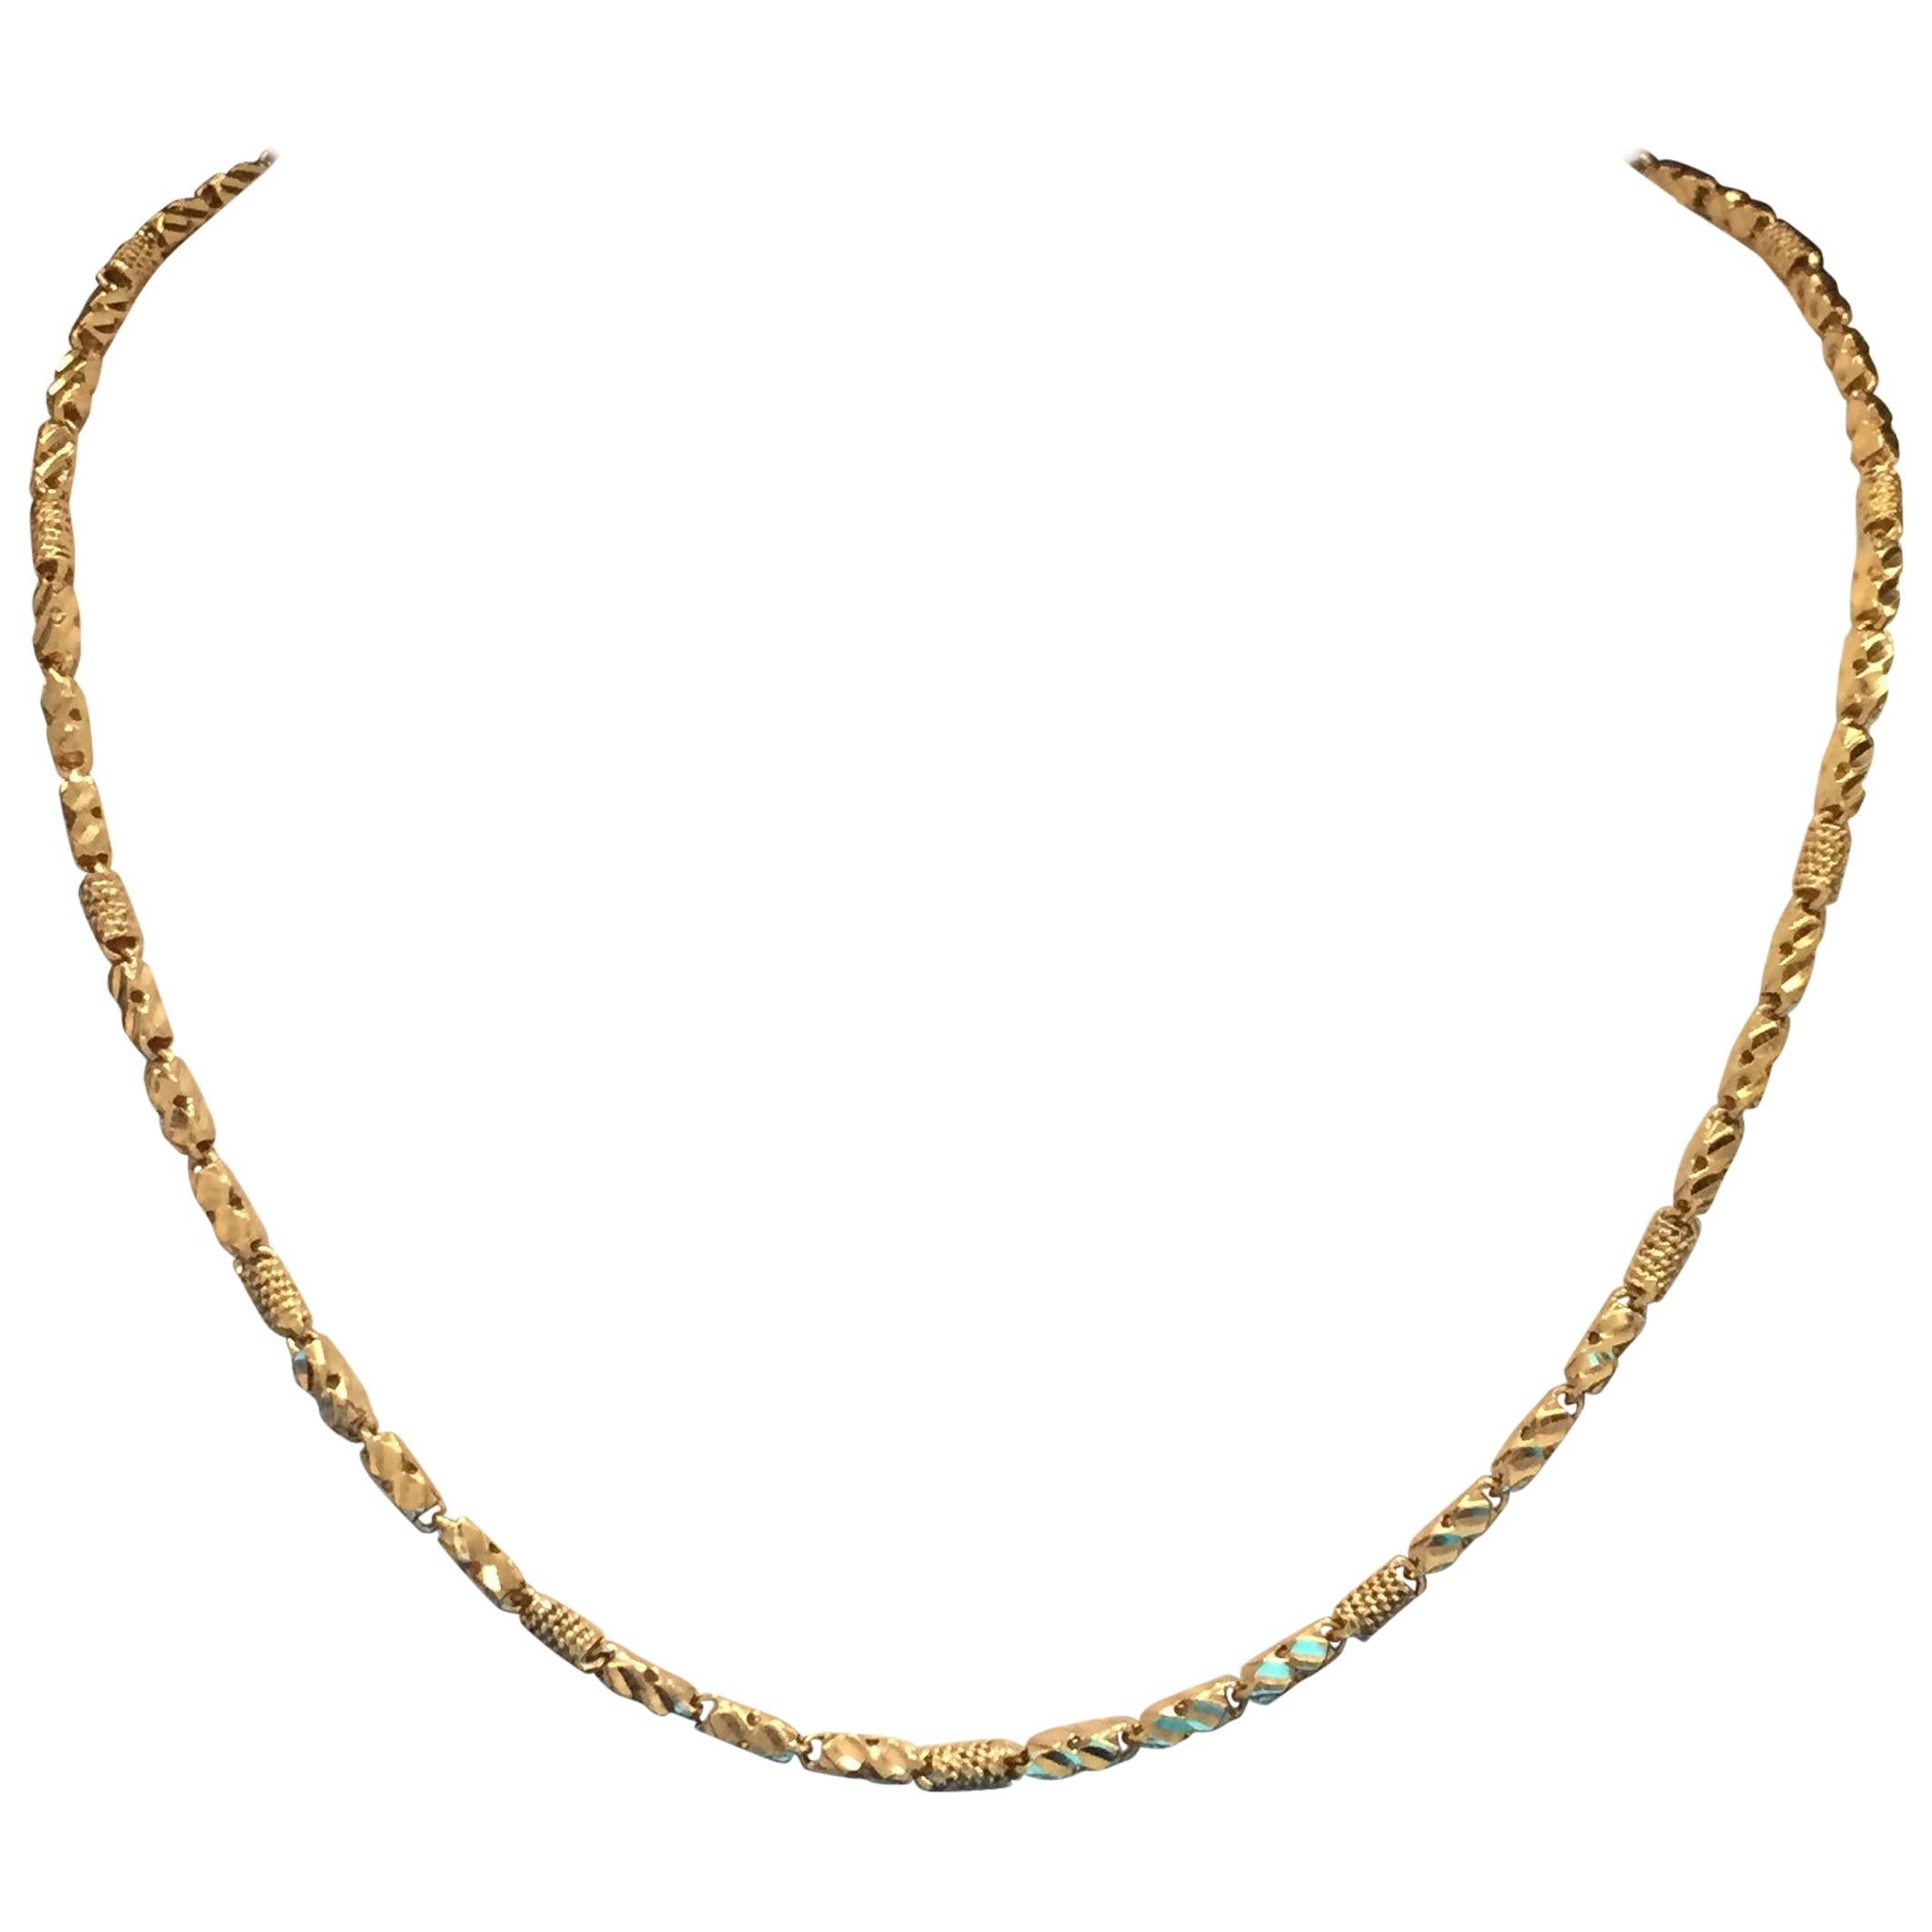 Designer Rope Necklace Gold Chain Solid 18 Karat Yellow Gold For Sale